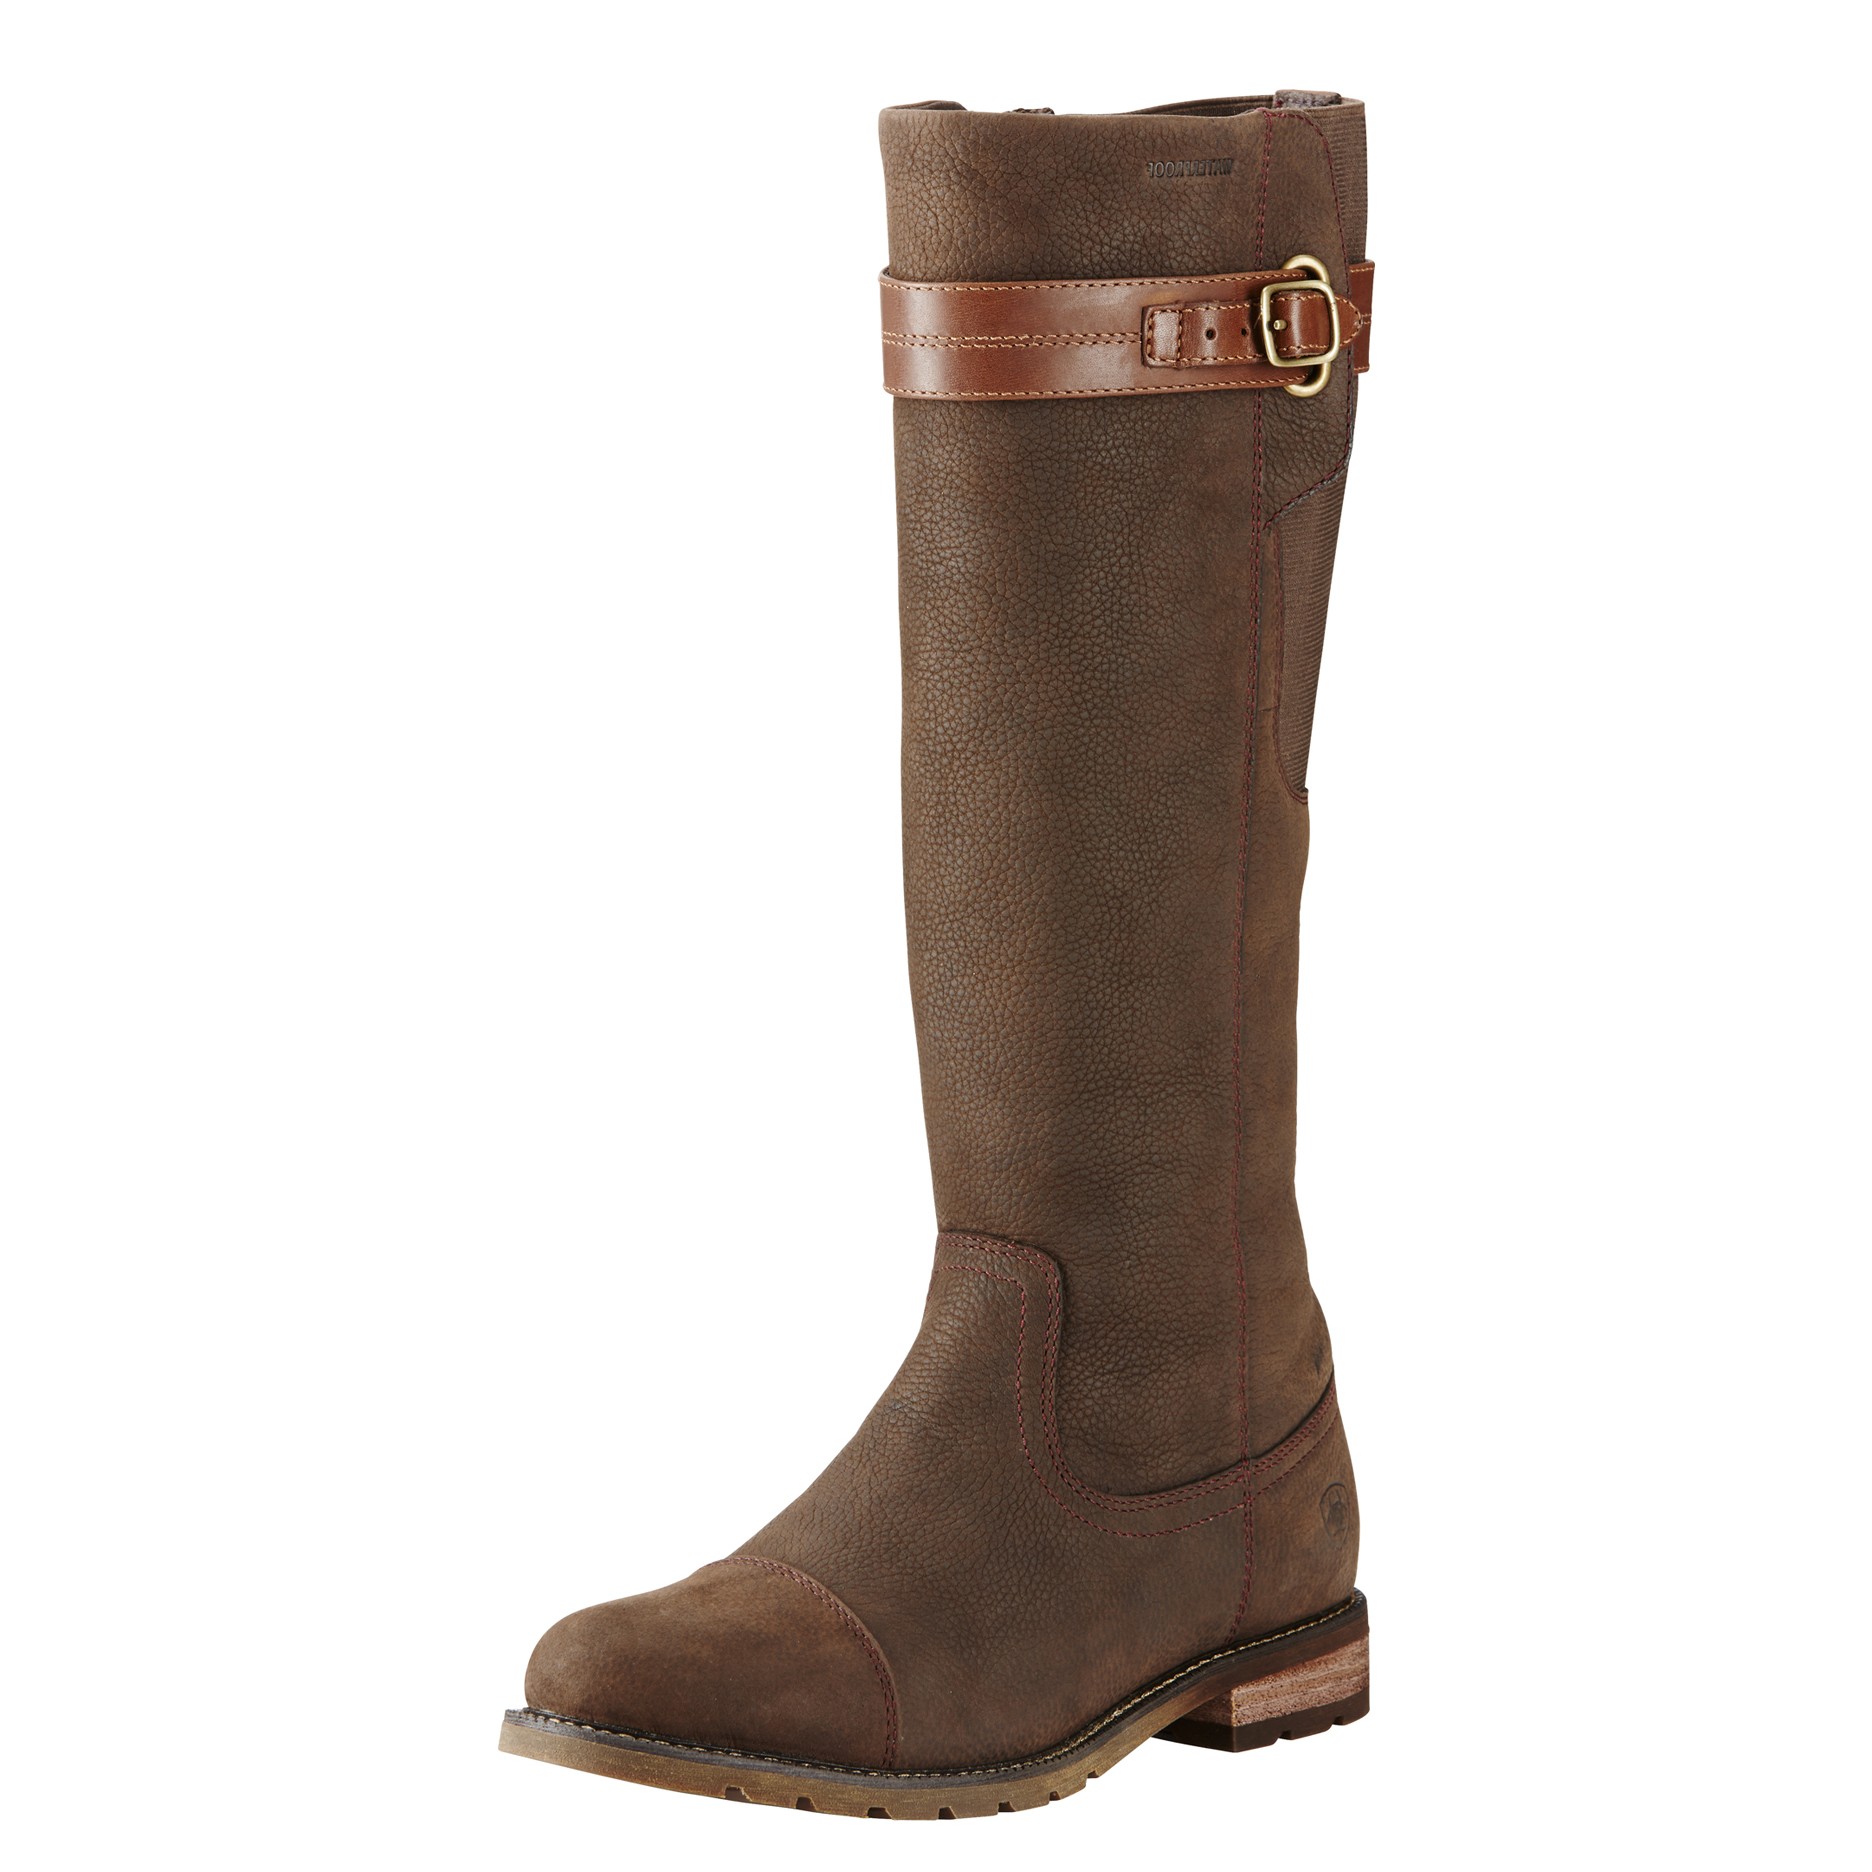 Java Brown Ariat Stoneleigh Leather Boots Reduced from £259 to £199 